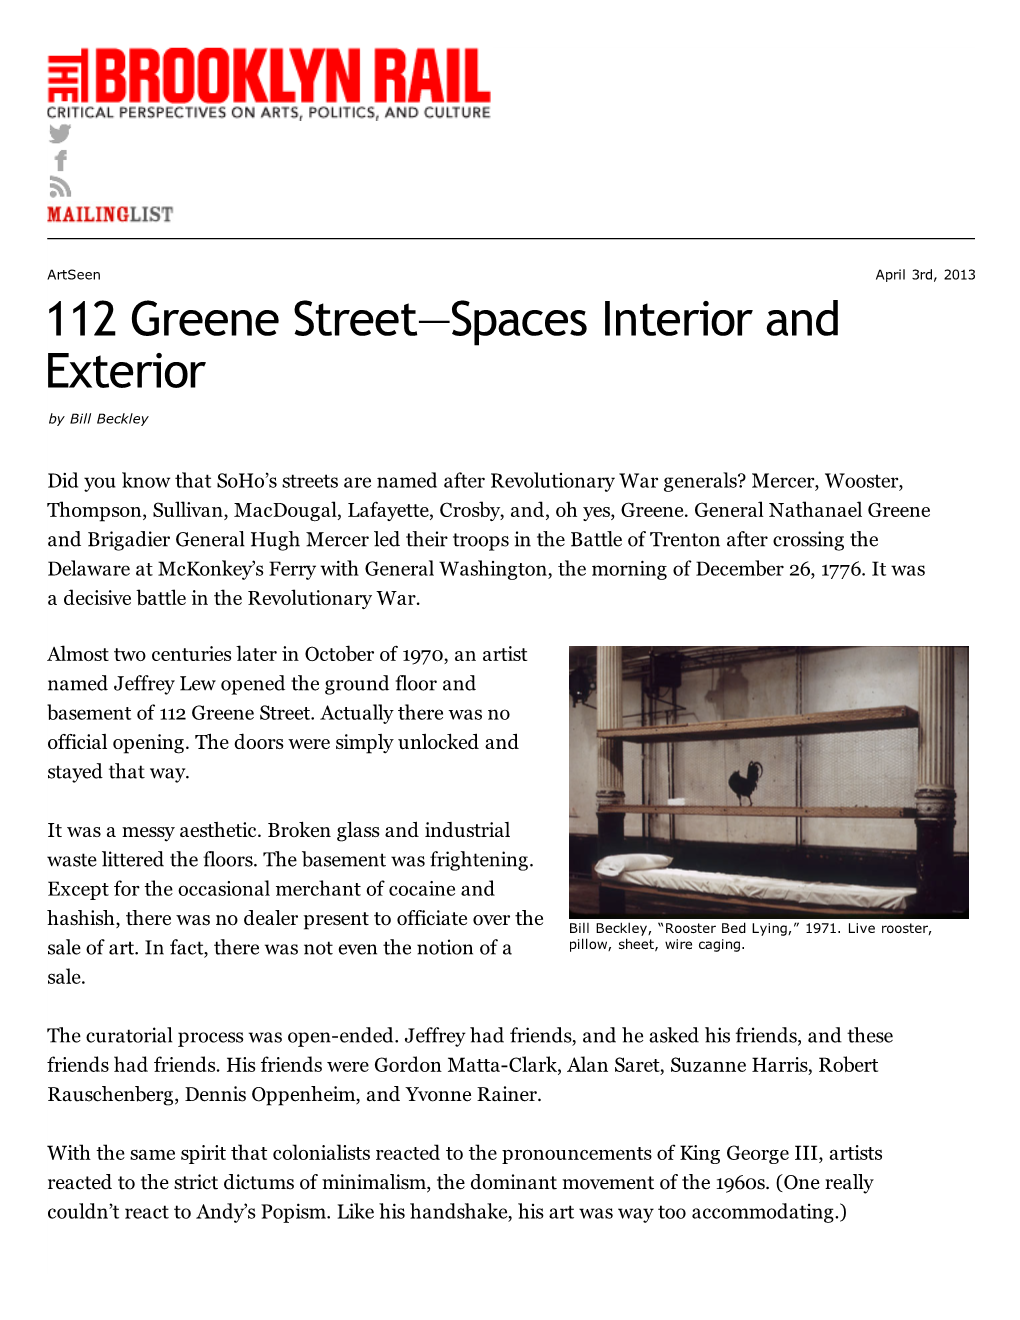 112 Greene Street—Spaces Interior and Exterior